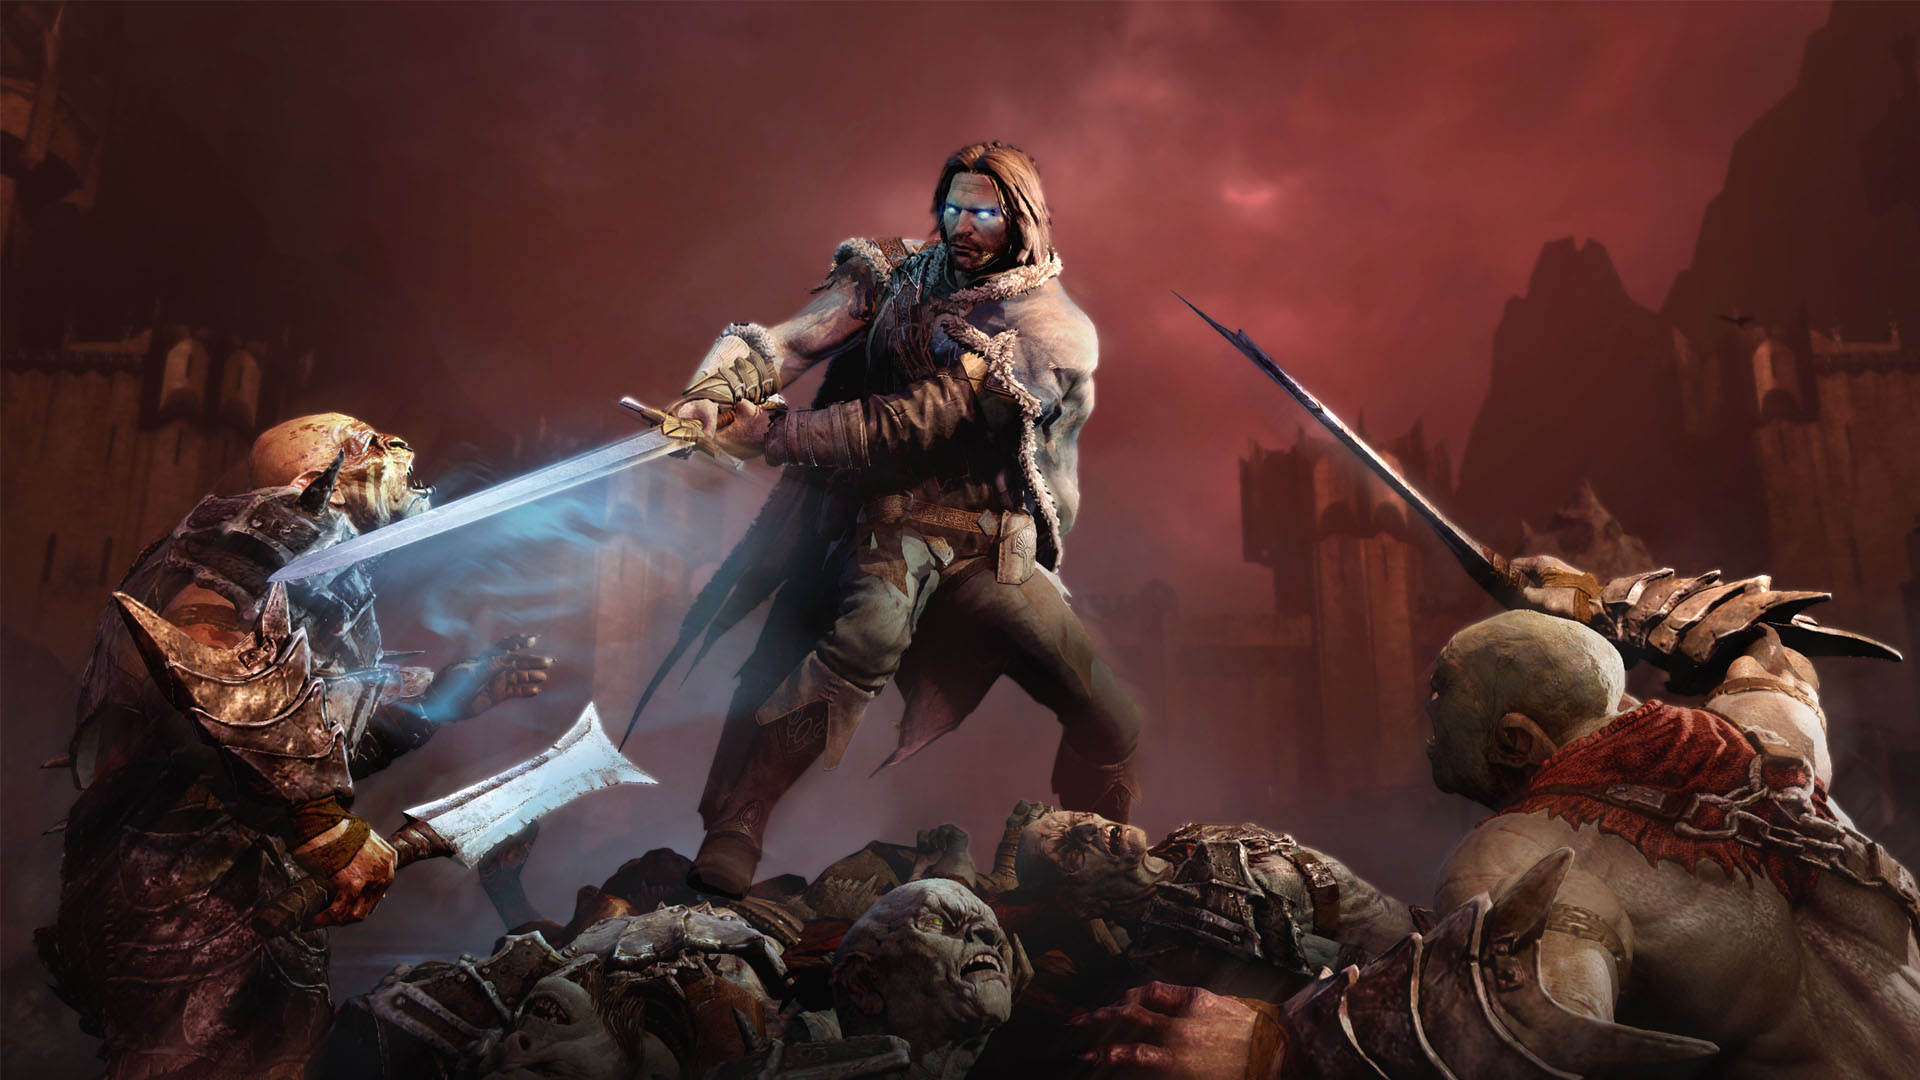 Middle-Earth: Shadow of Mordor - Complete DLC Bundle Steam CD Key 5.64$